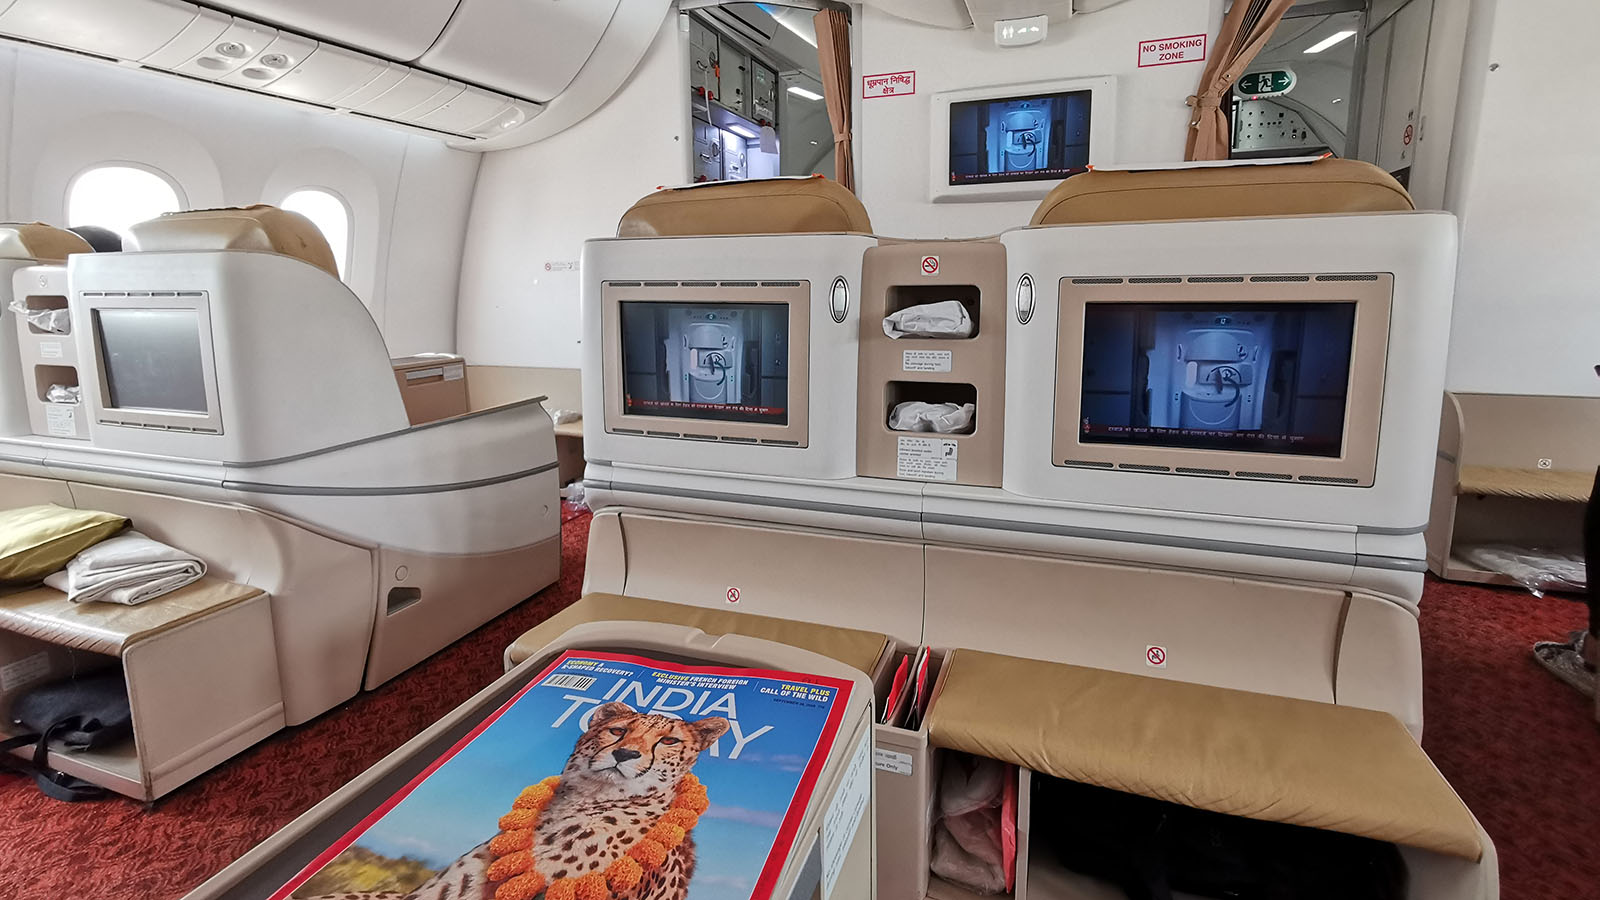 Cabin layout in Air India's Boeing 787 Business Class